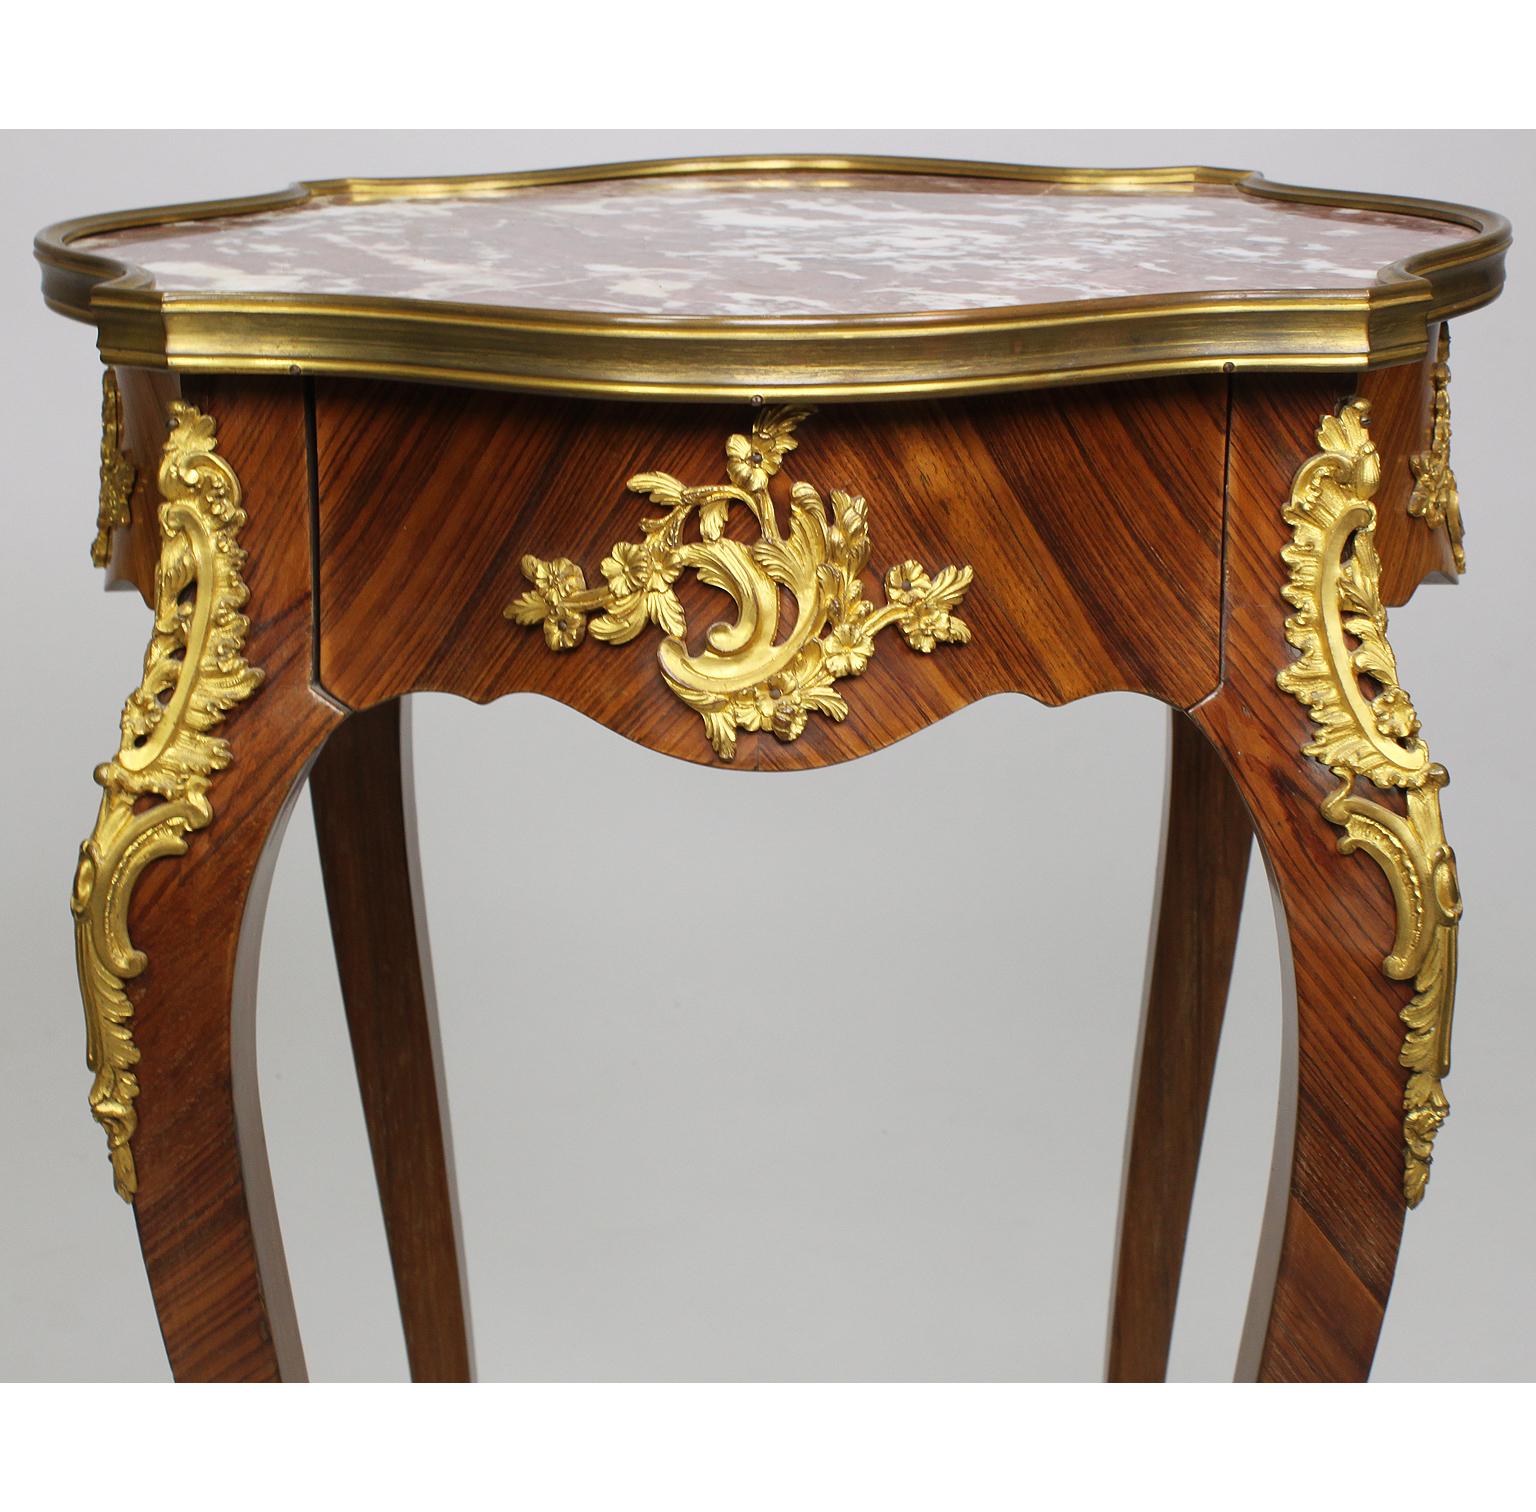 Gilt French 19th Century Louis XV Style Kingwood & Ormolu Mounted Side Table Gueridon For Sale